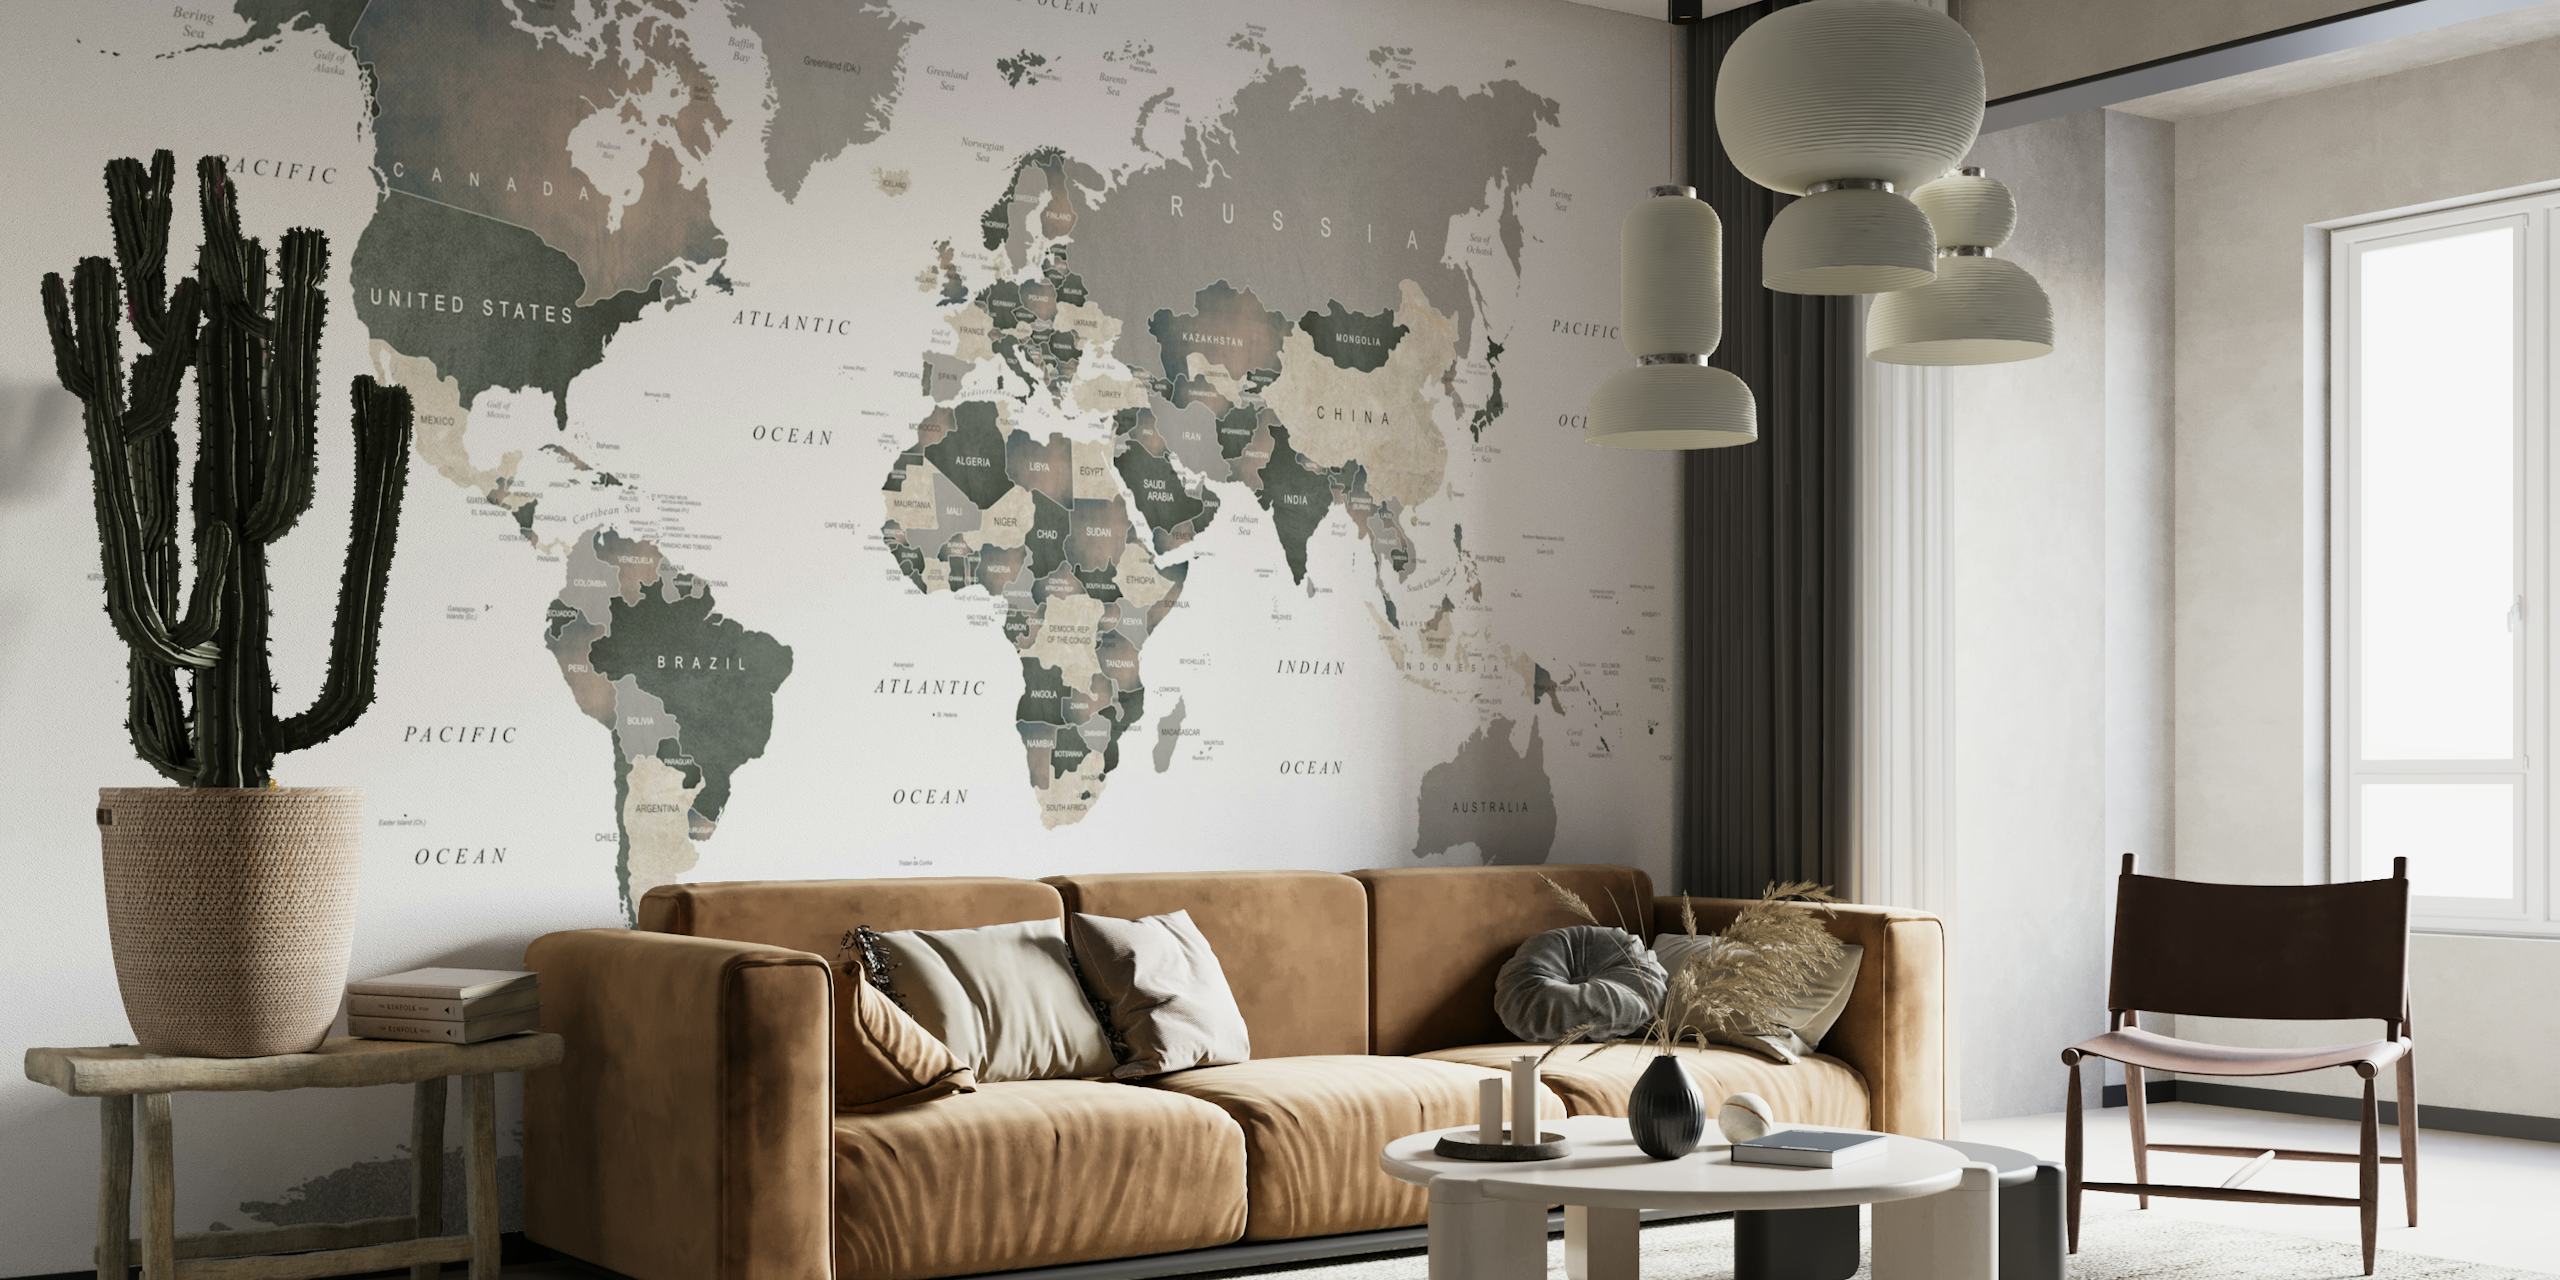 Map of the World Muted Tones ταπετσαρία